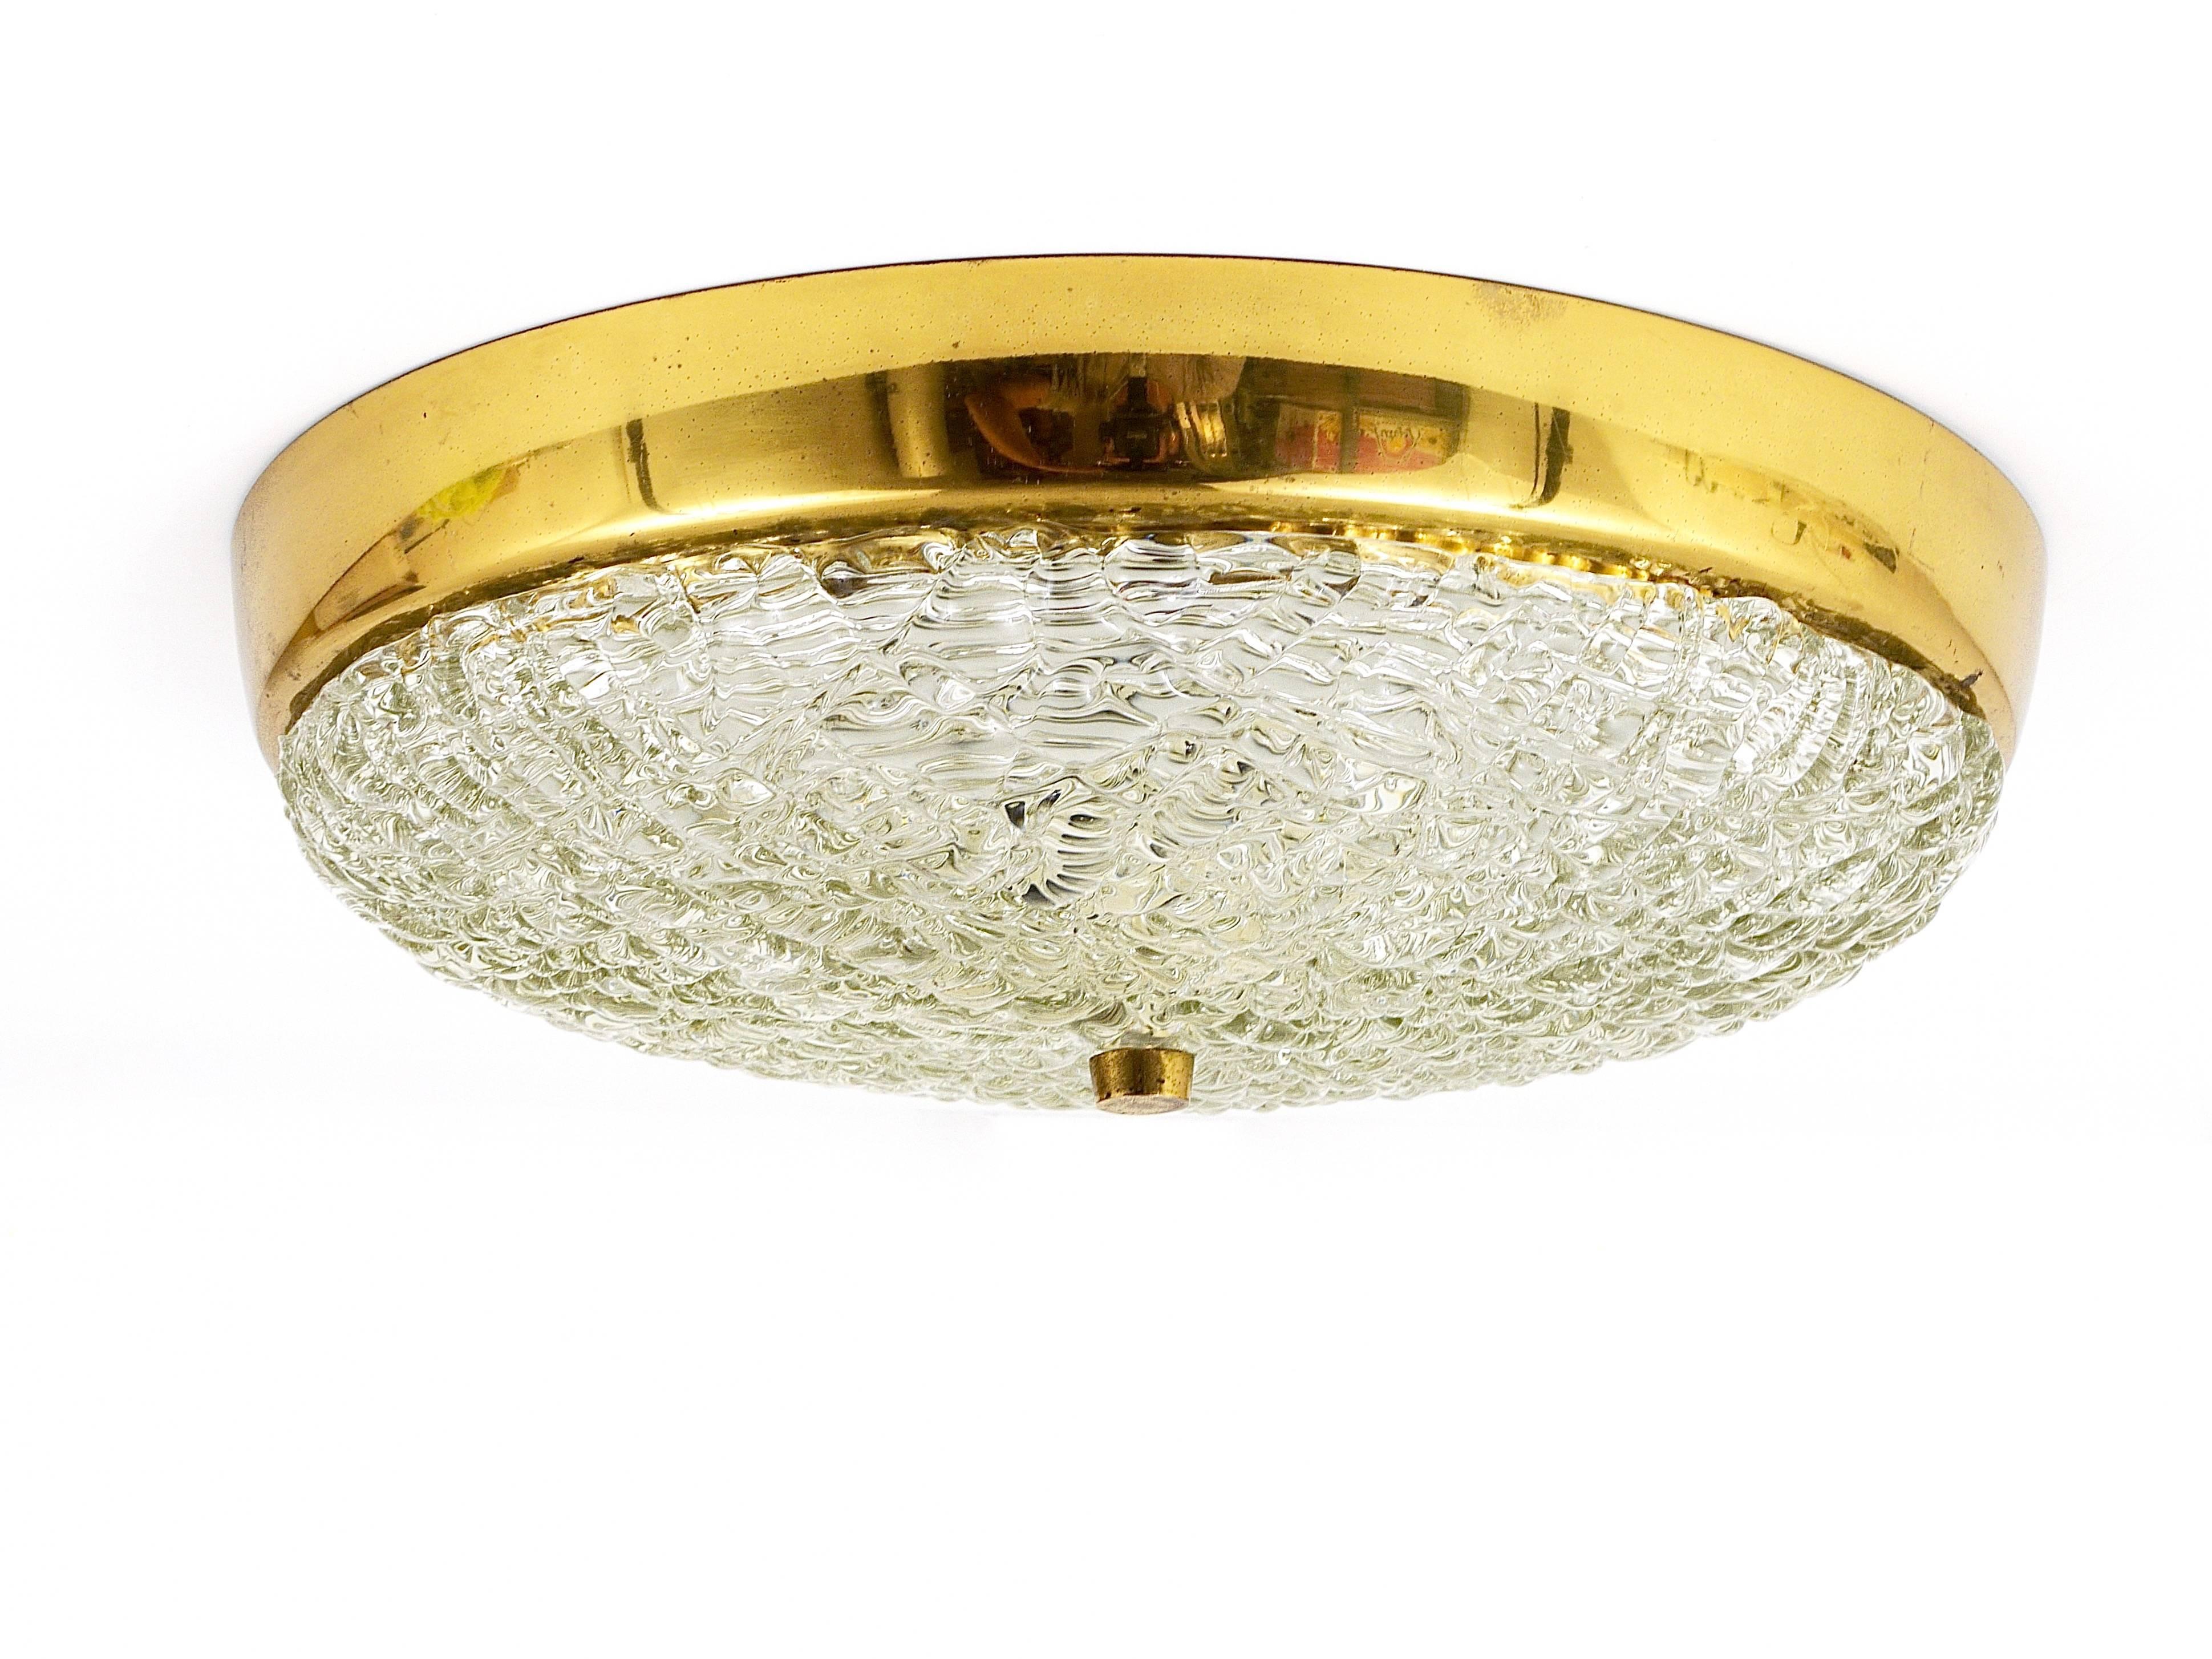 A stunning modernist flush mount lamp / ceiling light from the 1950s by Kalmar Vienna, Austria. This charming light features solid textured glass on a white metal base with a round brass frame and three light sources. It is in very good condition